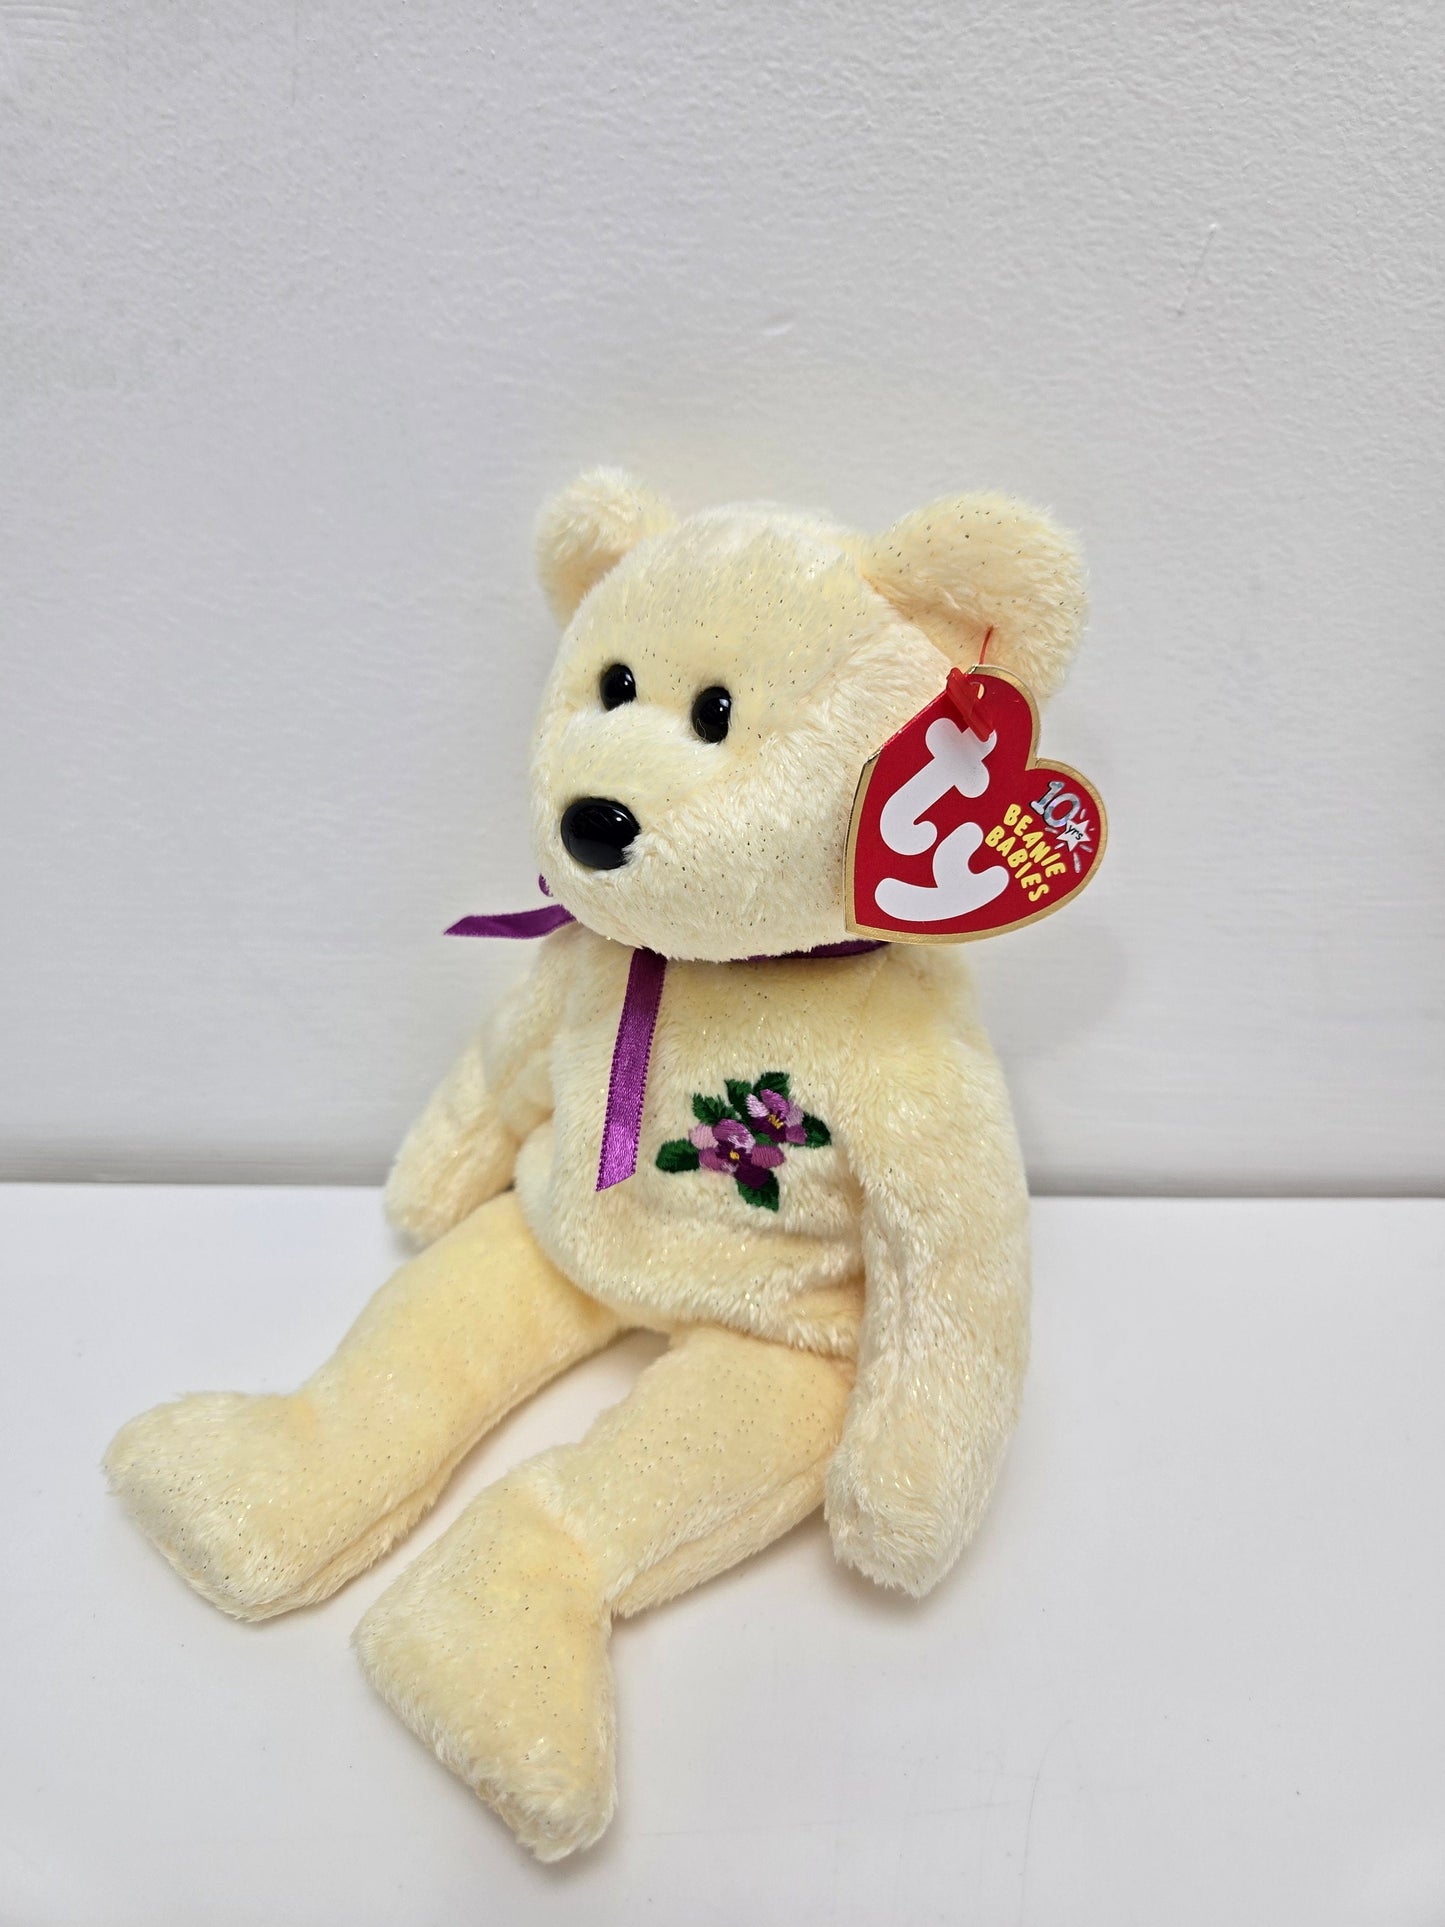 Ty Beanie Baby “Mother” the Yellow Mother’s Day or Gift for Mom Bear! (8.5 inch)